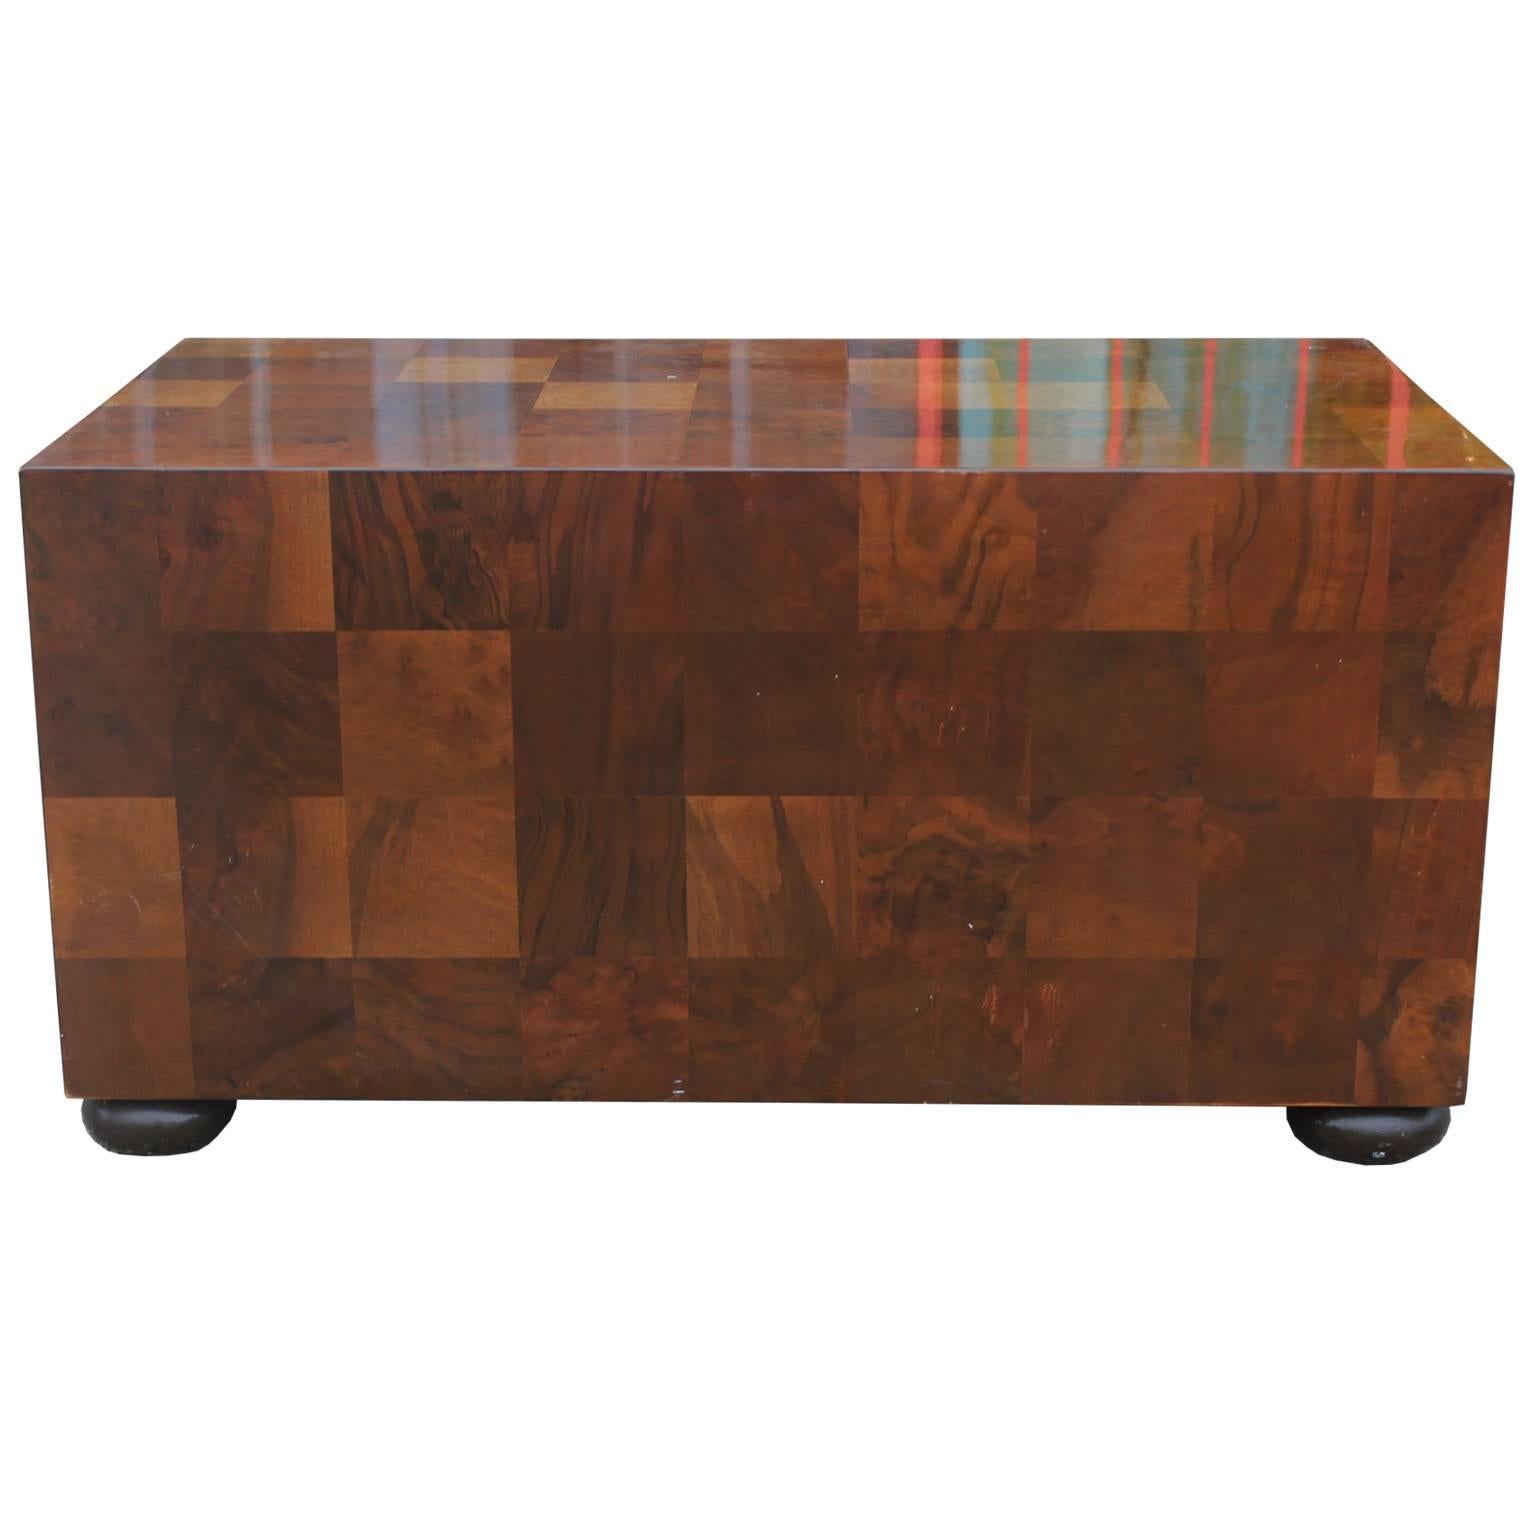 Hollywood Regency Modern Checkered Parquetry Low Chest with Brass Hardware